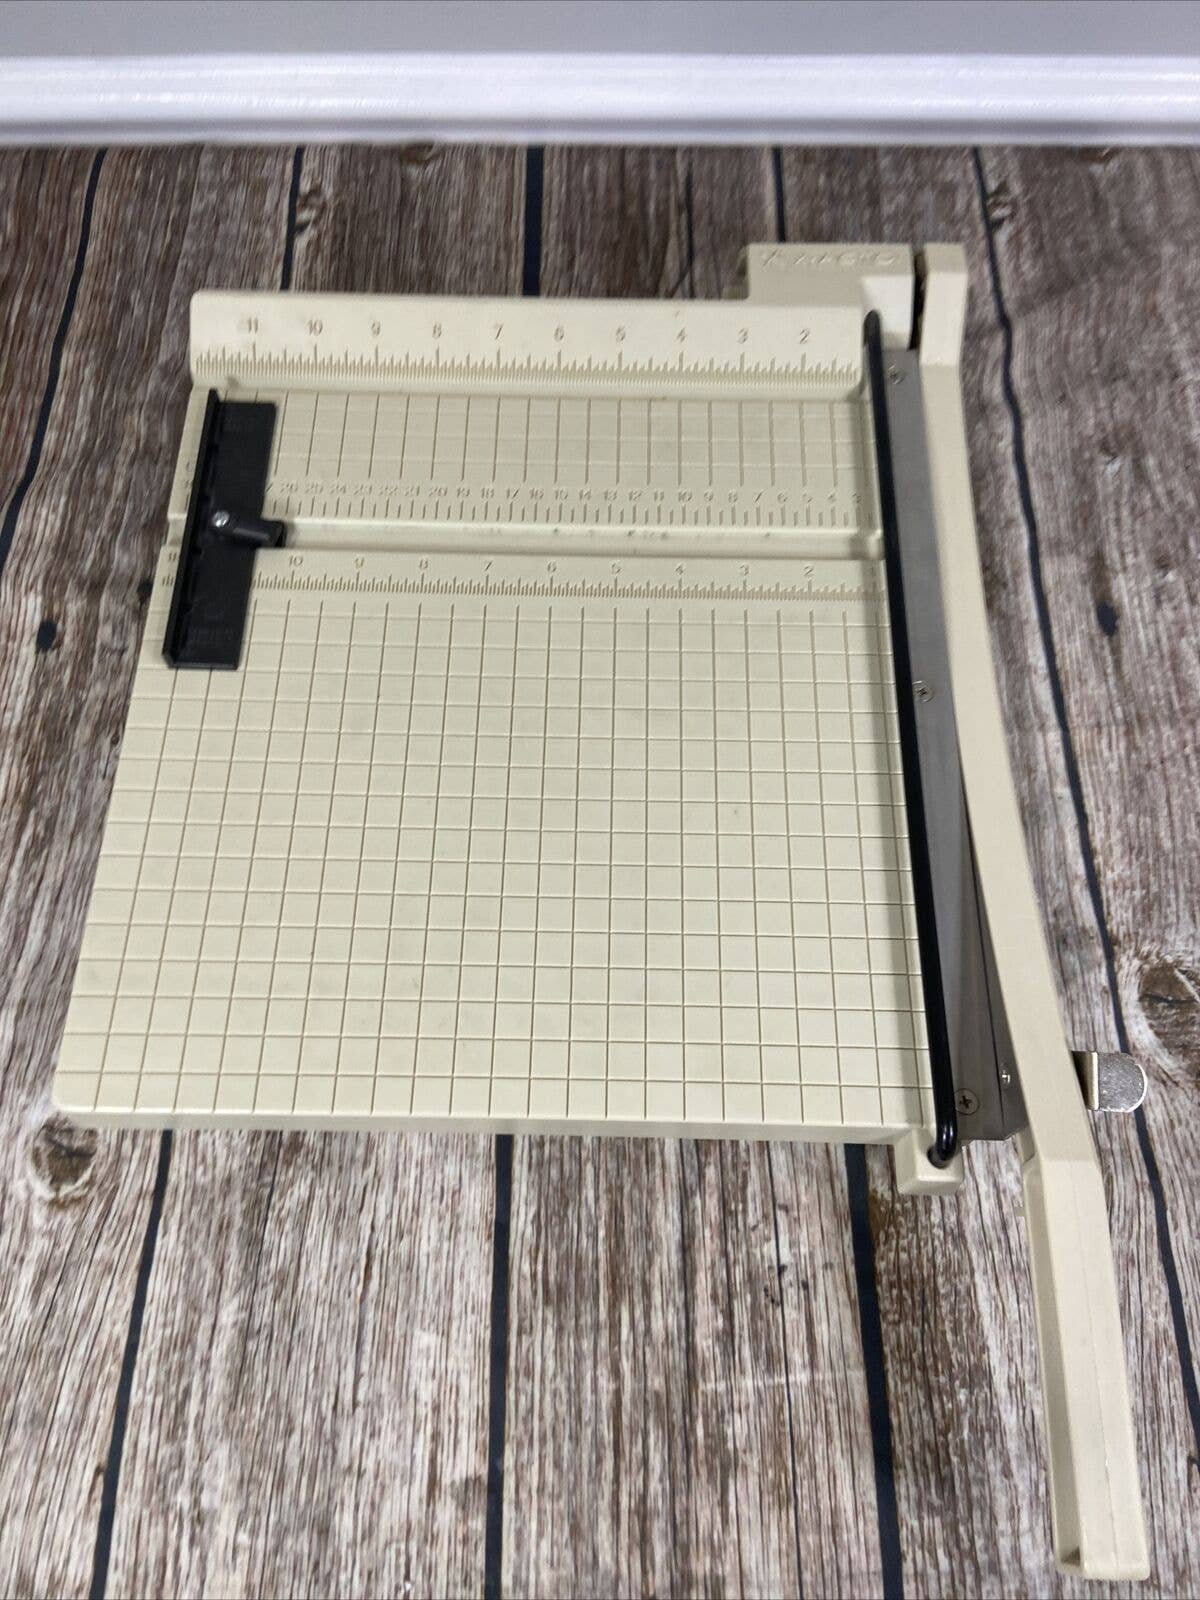 Paper Cutter, Paper Guillotine, Small Guillotine, Cute Paper Cutting Board,  Paper Trimmer, Paper Cutter With Ruler, Blades Available, 1pc 